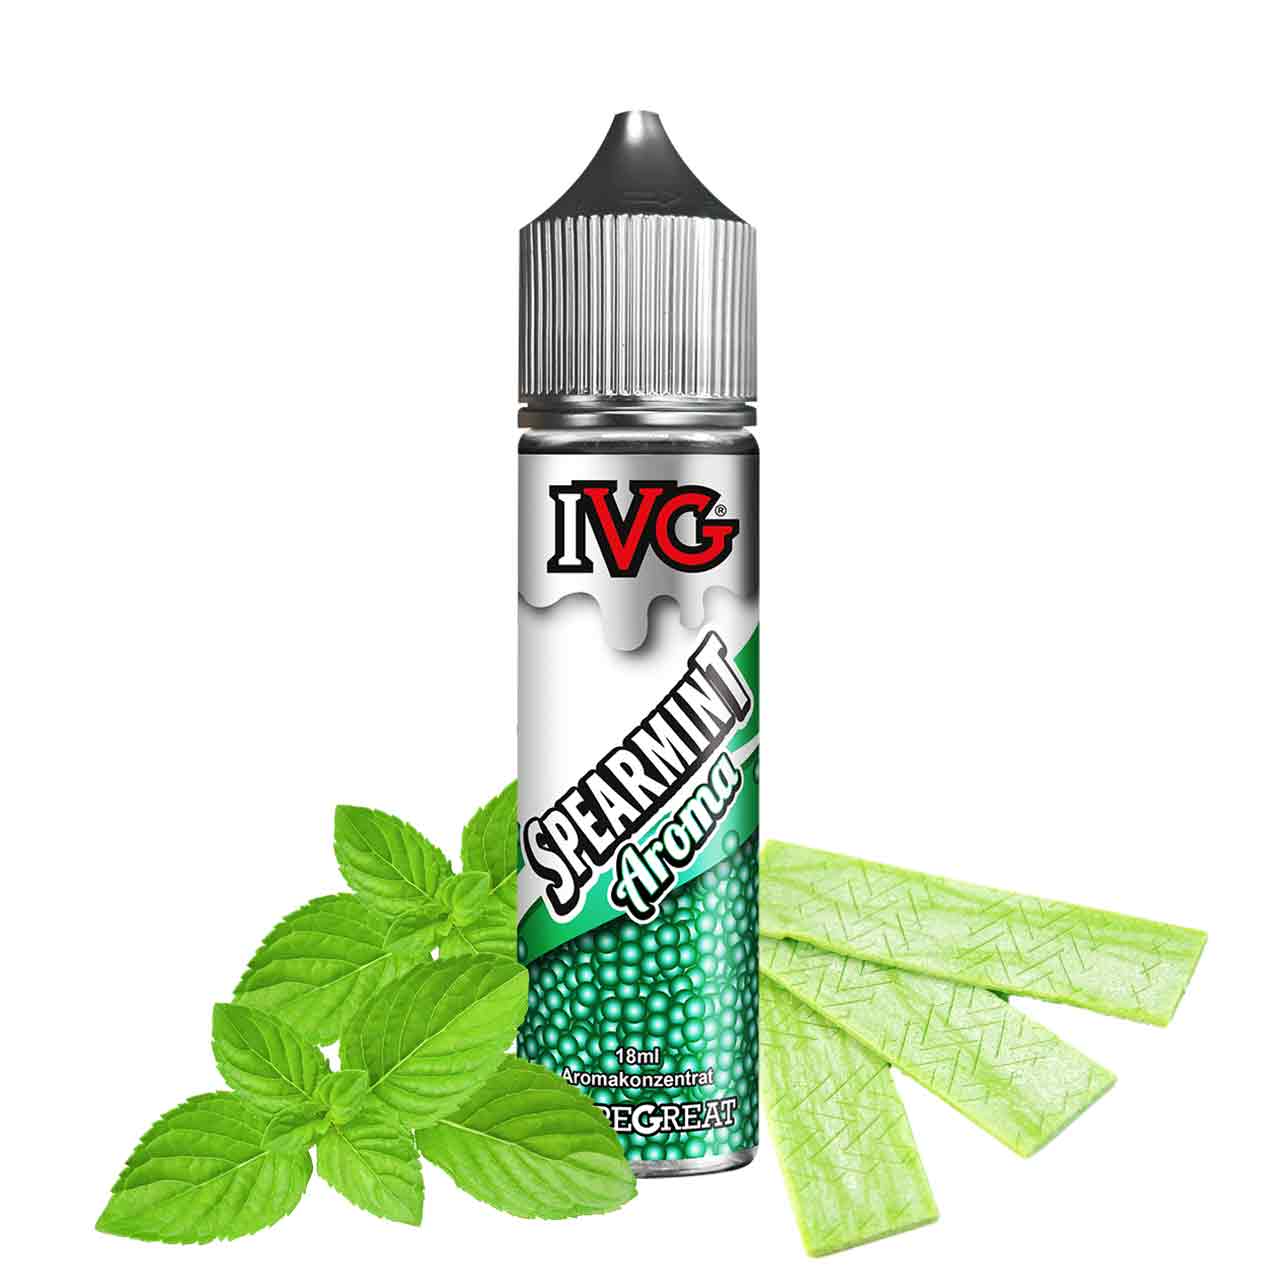 IVG Spearmint Aroma Longfill